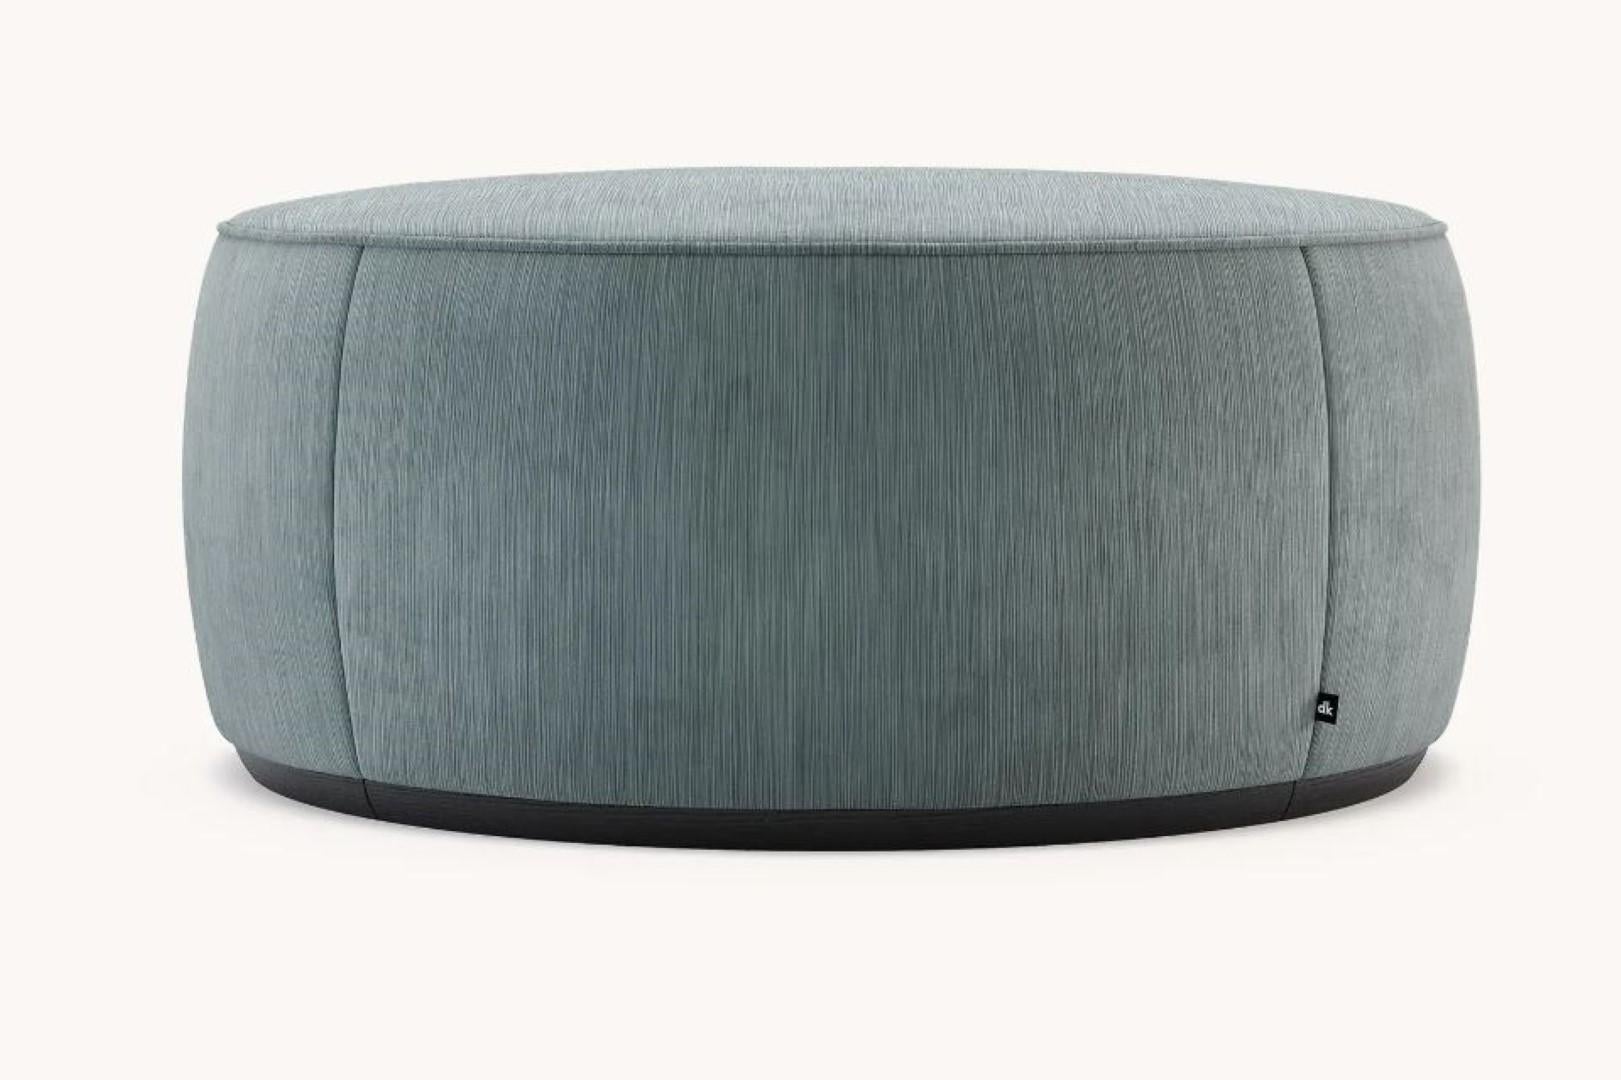 Rachel M Pouf by Domkapa
Materials: Velvet, Upholstery, Black Ash. 
Dimensions: W 92 x D 92 x H 45 cm. 
Also available in different materials. Please contact us.

Rachel pouf and its delicate round-shaped design is a piece made to bring extra